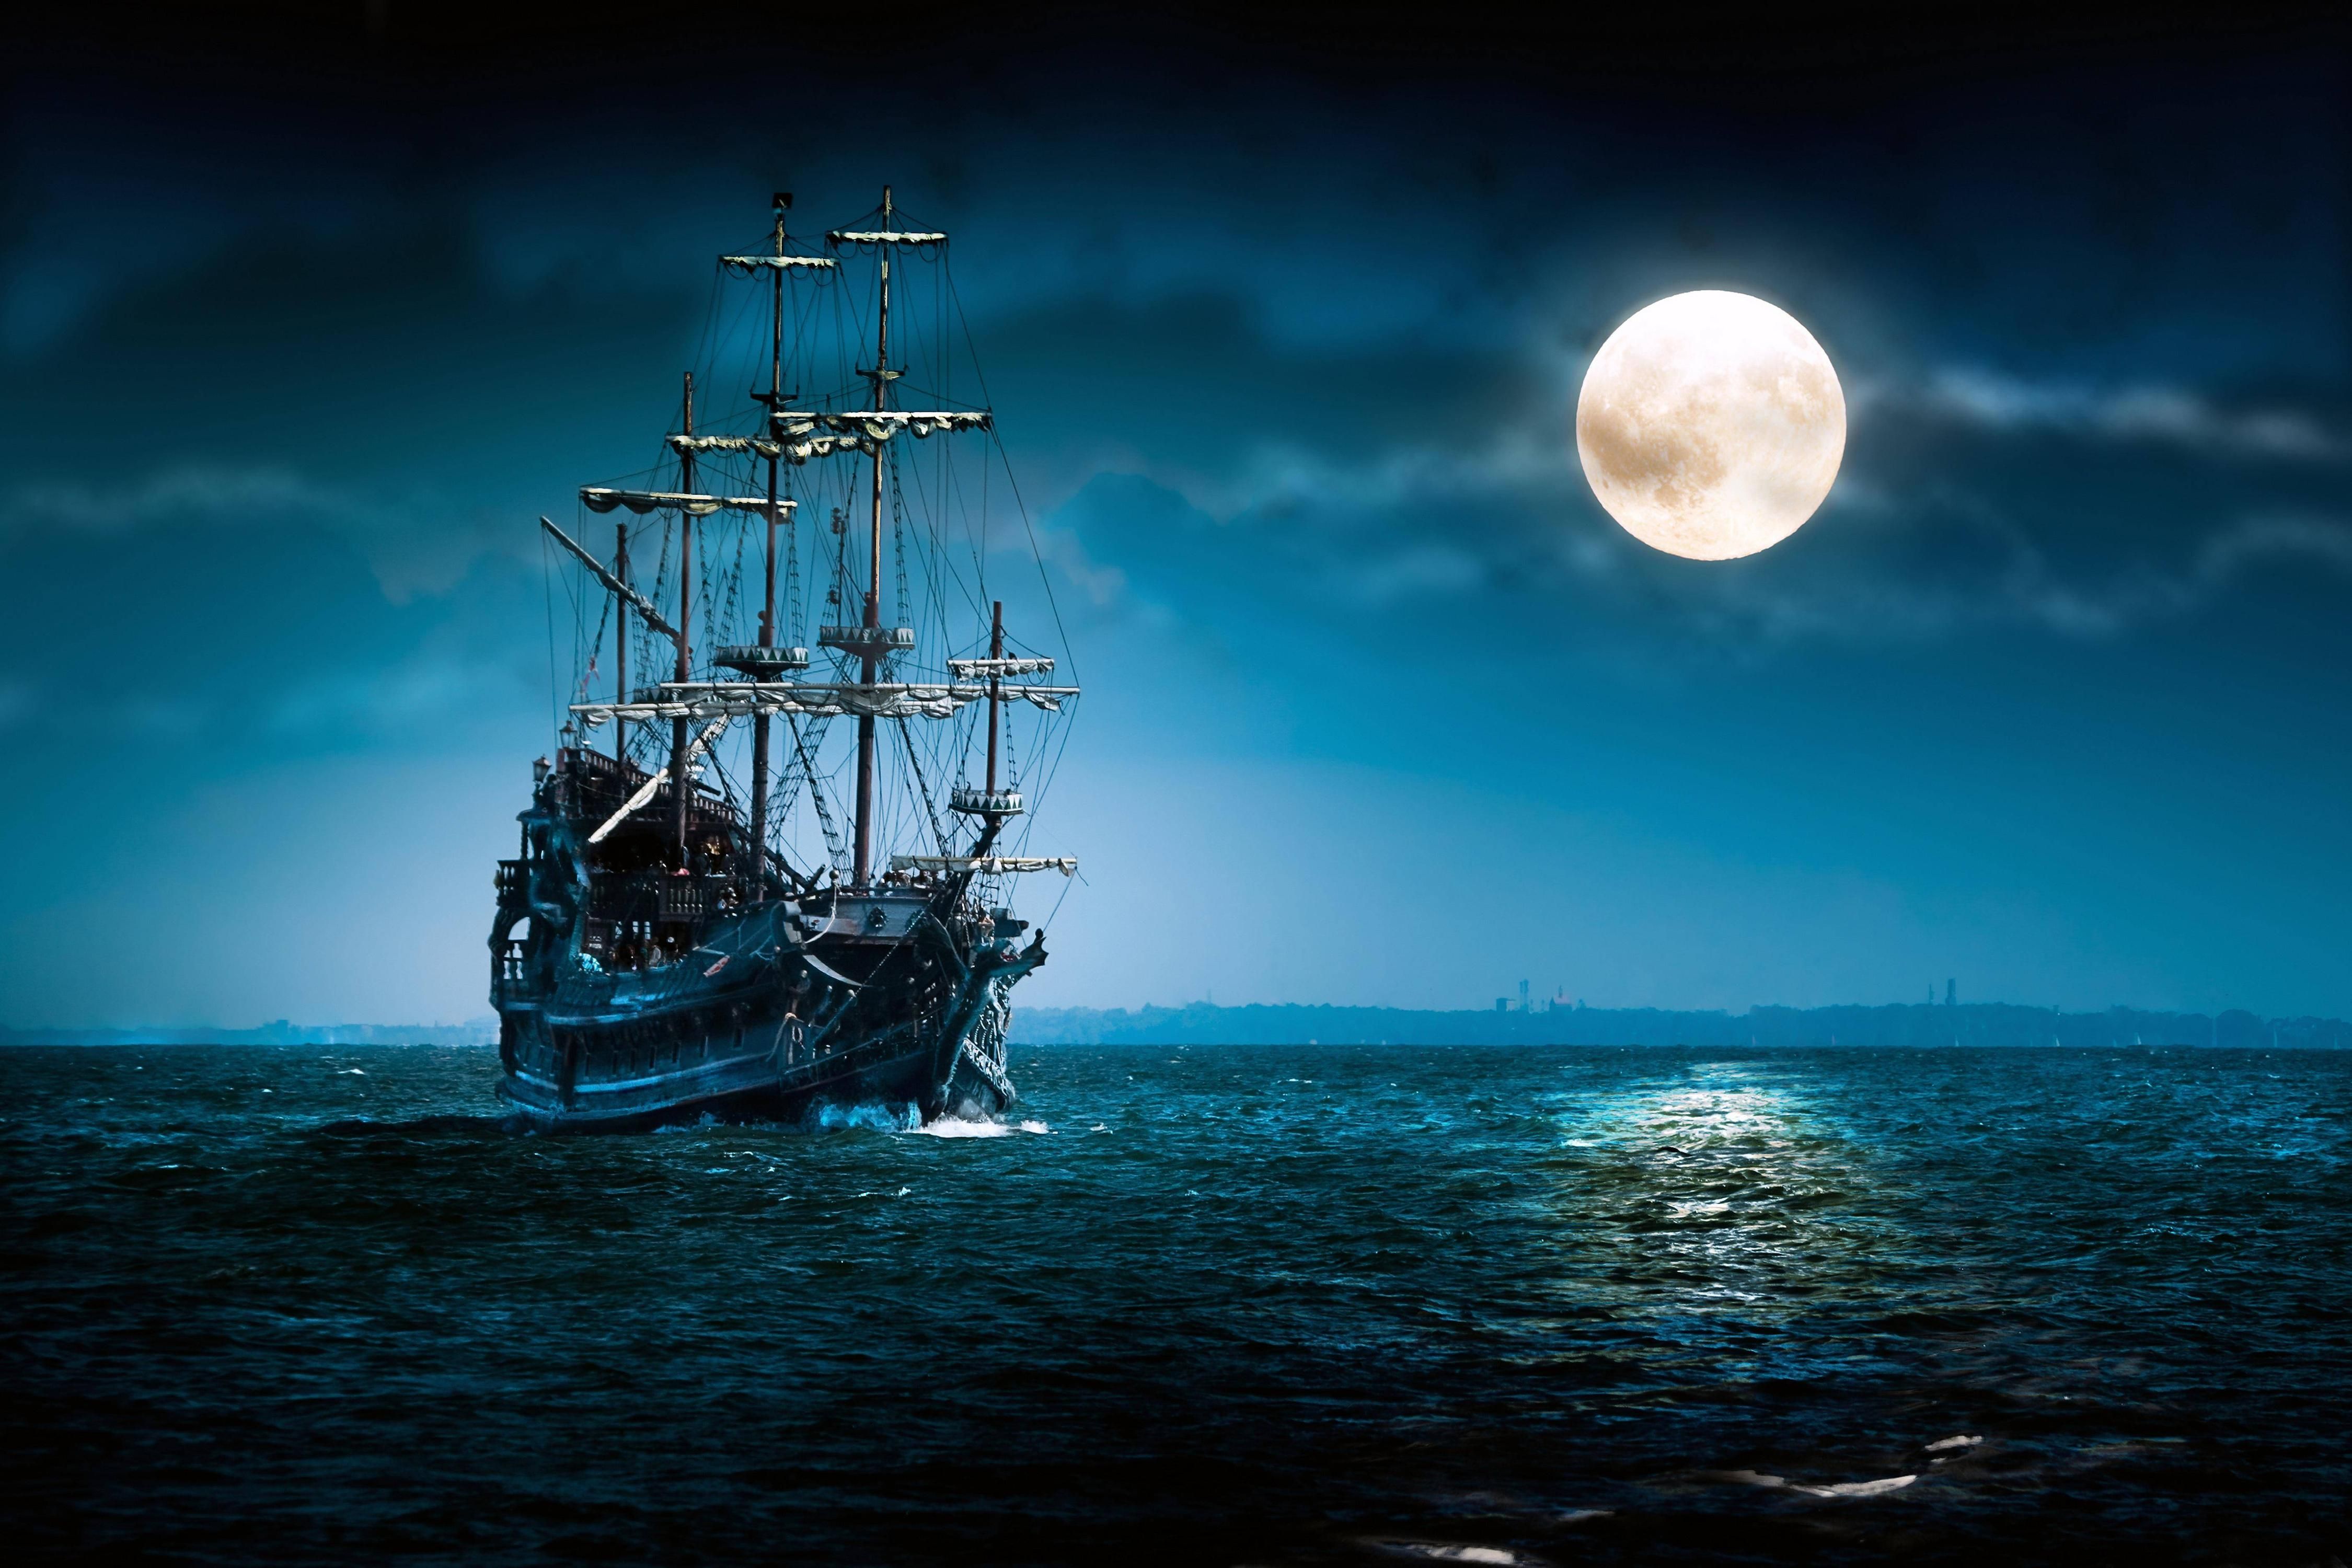 Pirate Ship Background. Old sailing ships